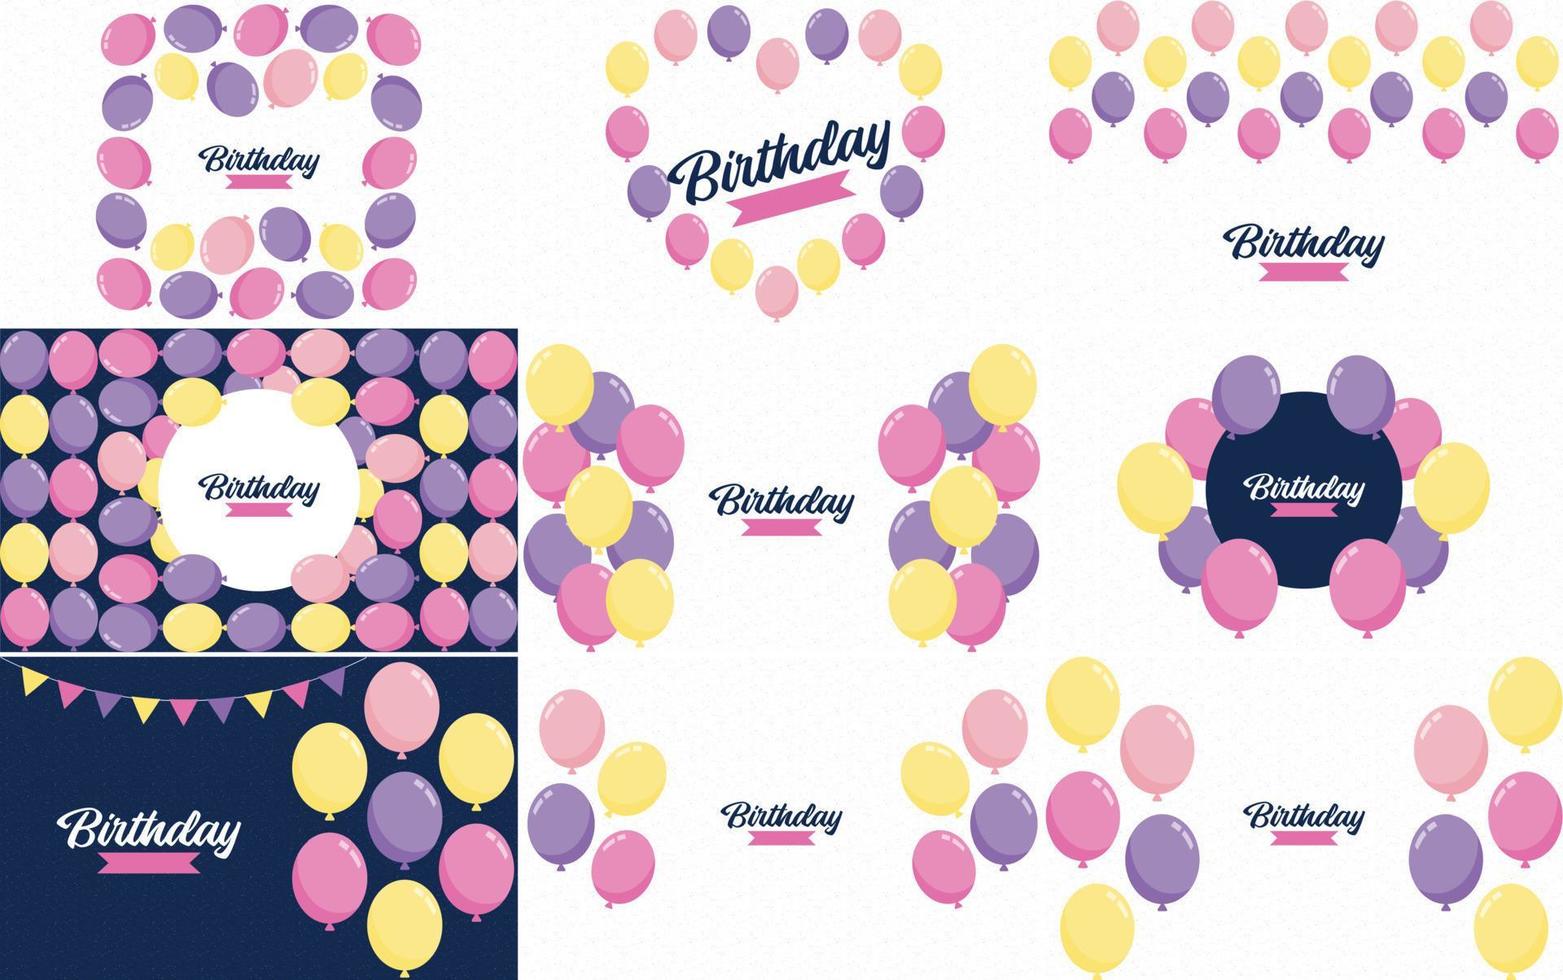 Happy Birthday text with a hand-drawn. cartoon style and colorful balloon illustrations vector